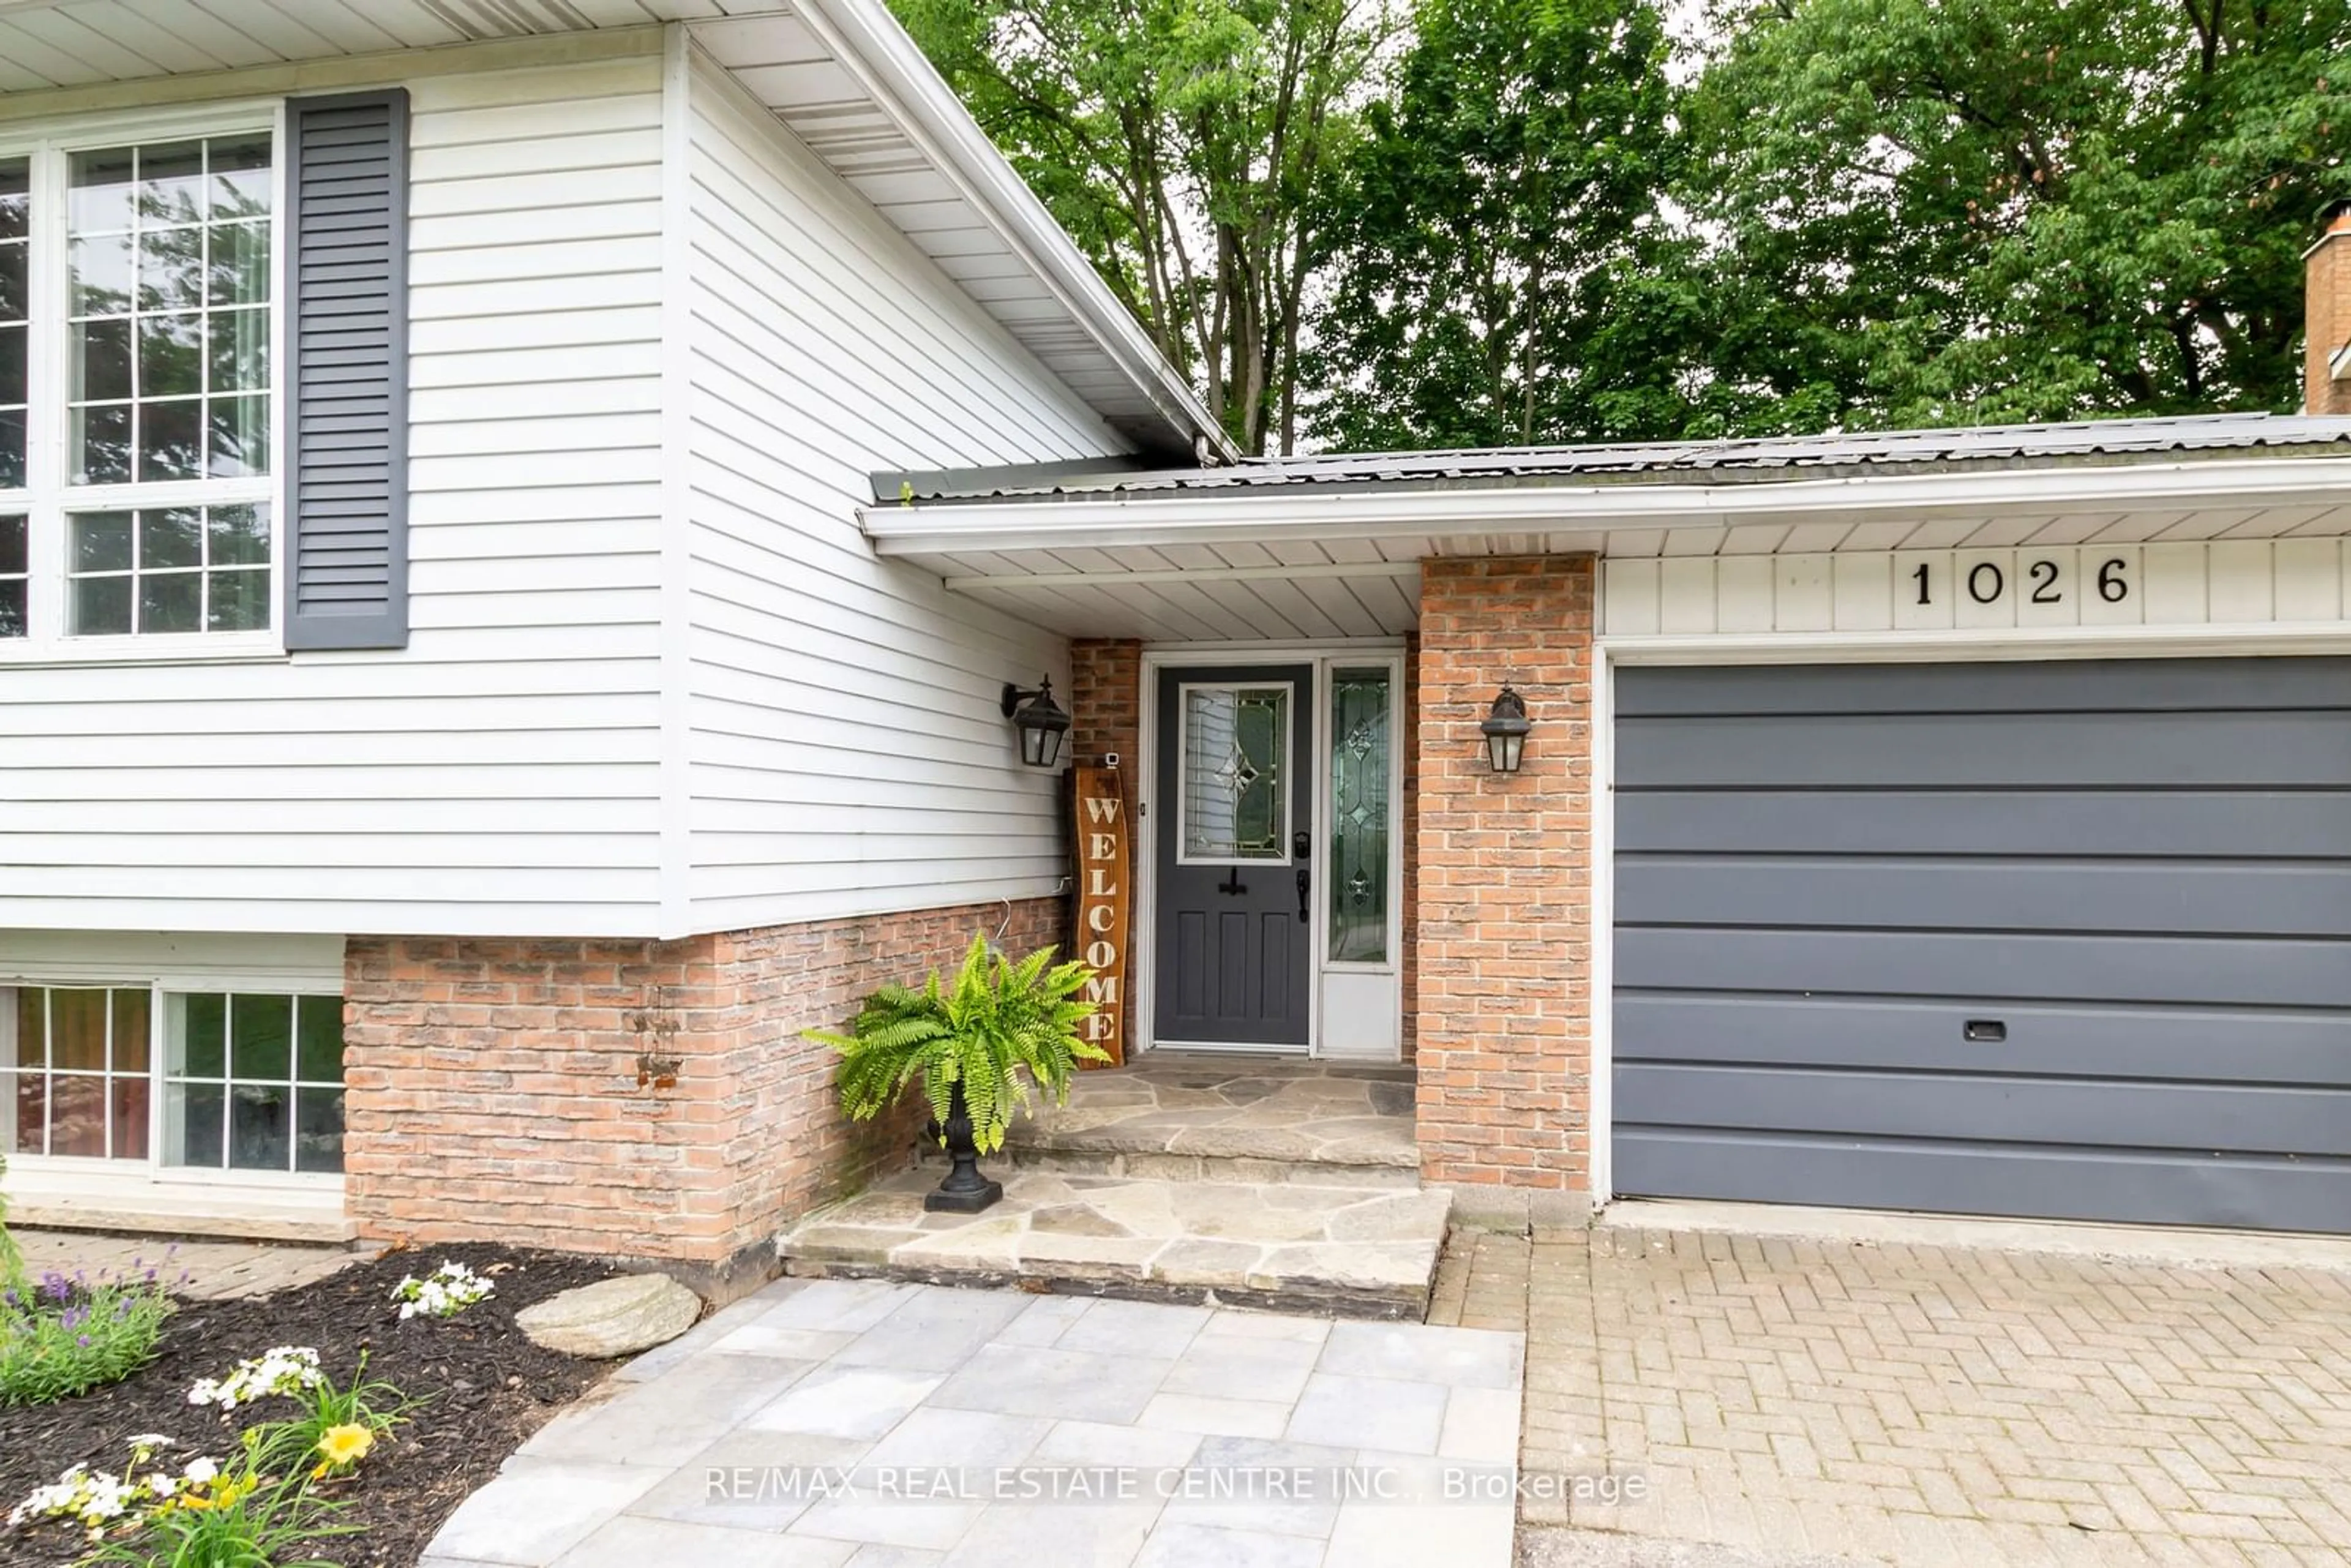 Home with brick exterior material for 1026 St Matthews Ave, Burlington Ontario L1T 2J4